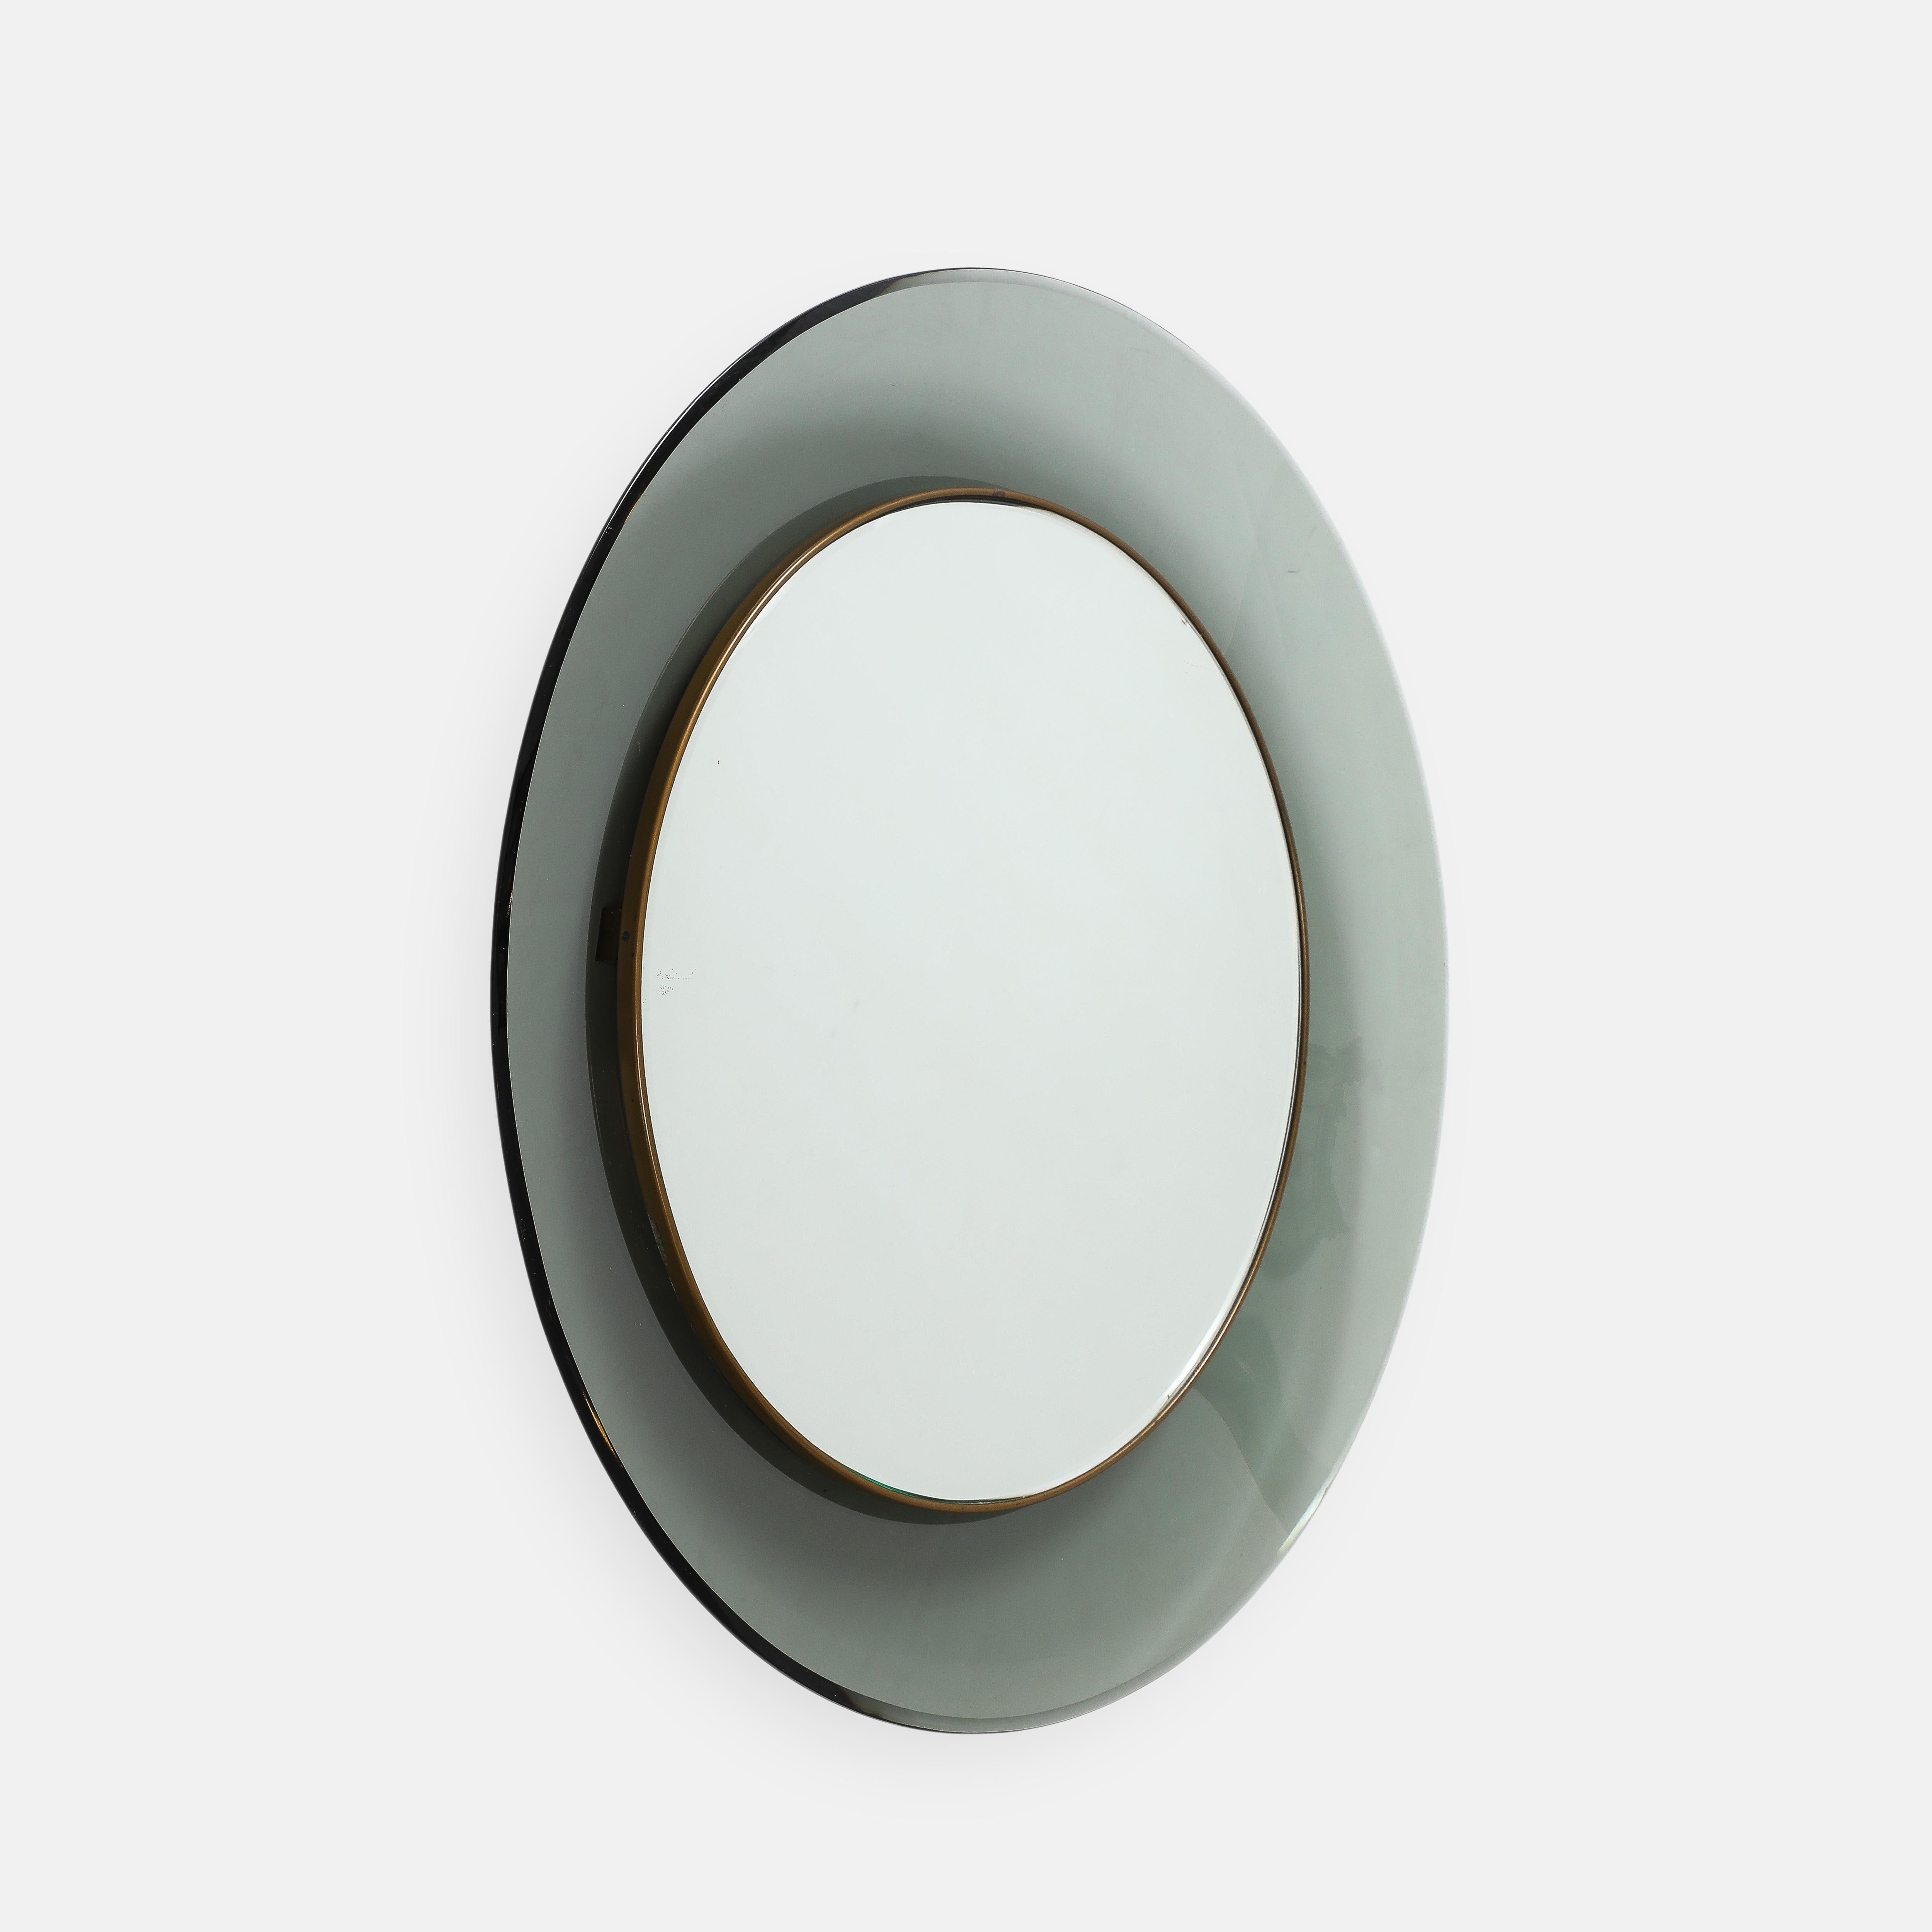 Max Ingrand for Fontana Arte classic and elegant round mirror model 1669 in gray-green colored, curved and beveled glass framing mirrored glass encased in brass trim.  
Dated on reverse '28 ago 1963.'

Literature:
Quaderni Fontana Arte 2,